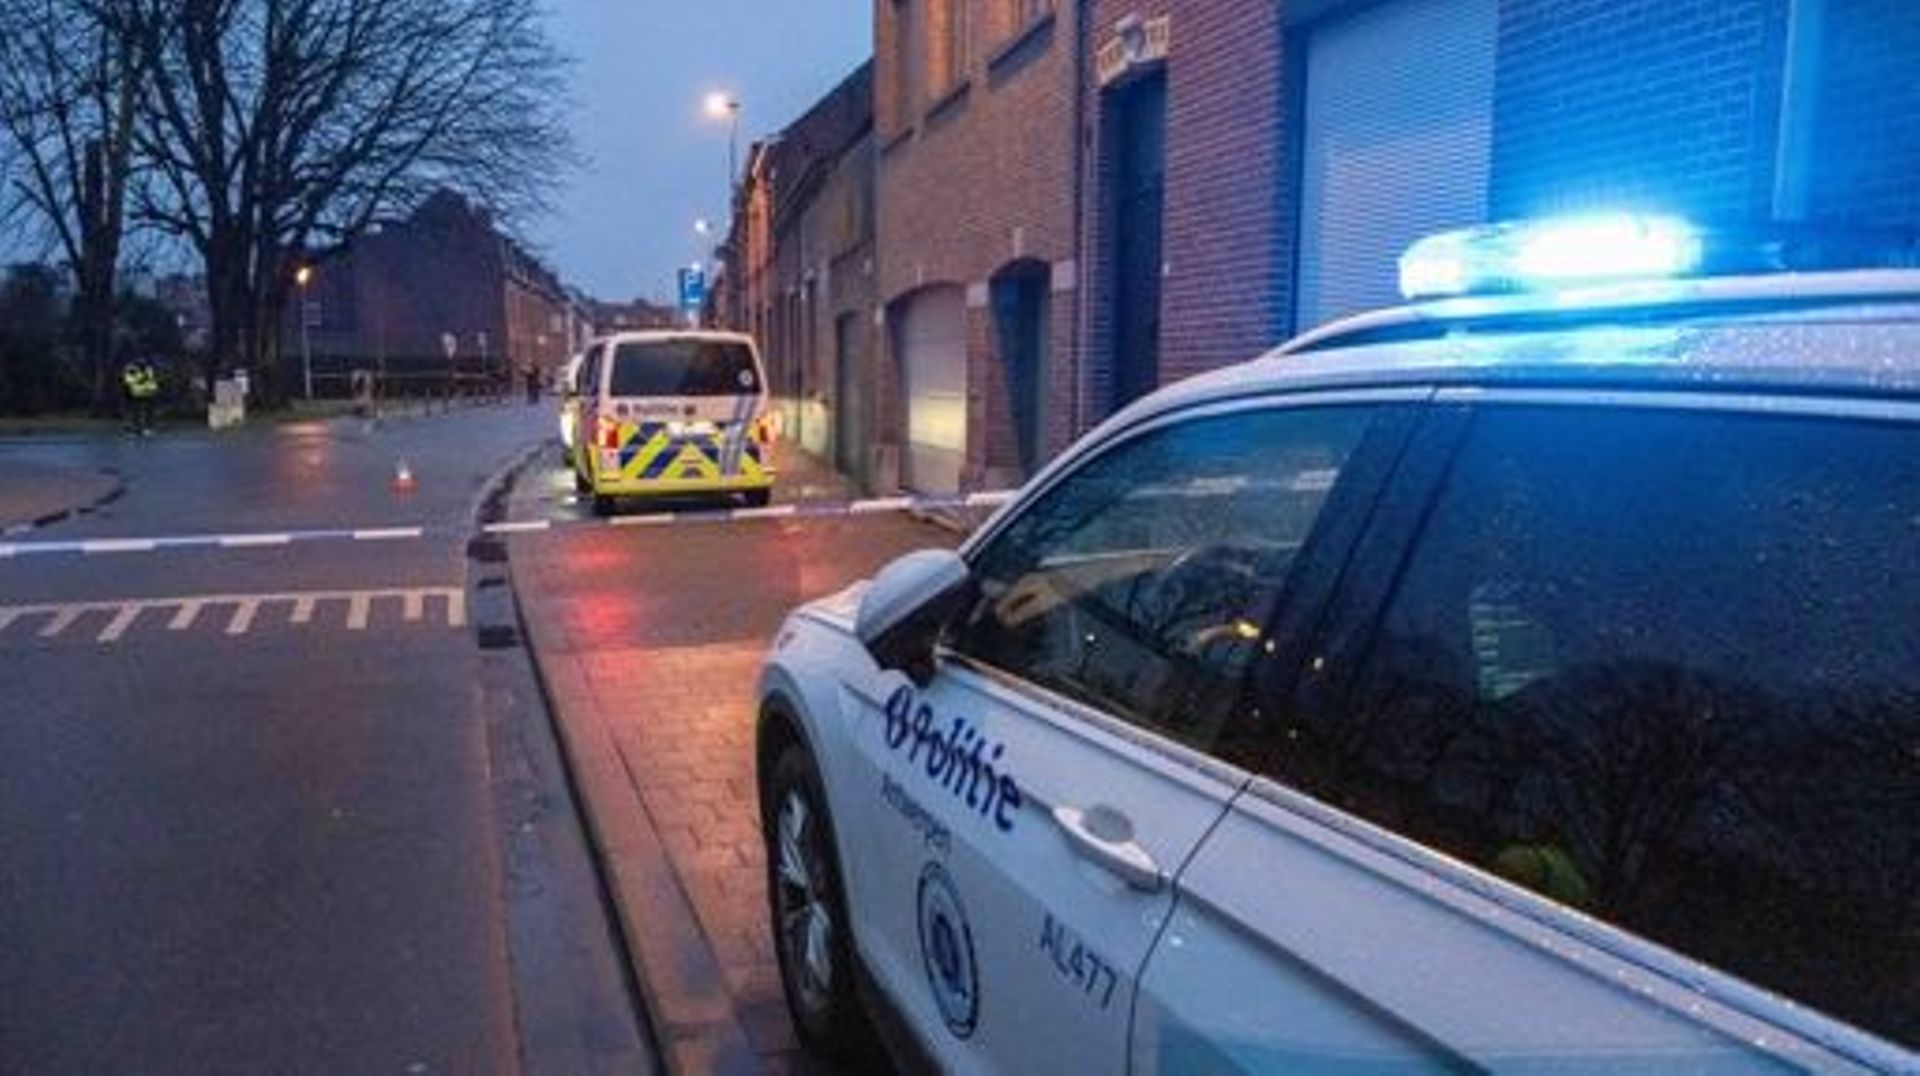 Drug-related violence in Antwerp: one minor injury and 15 homes damaged by a serious explosion